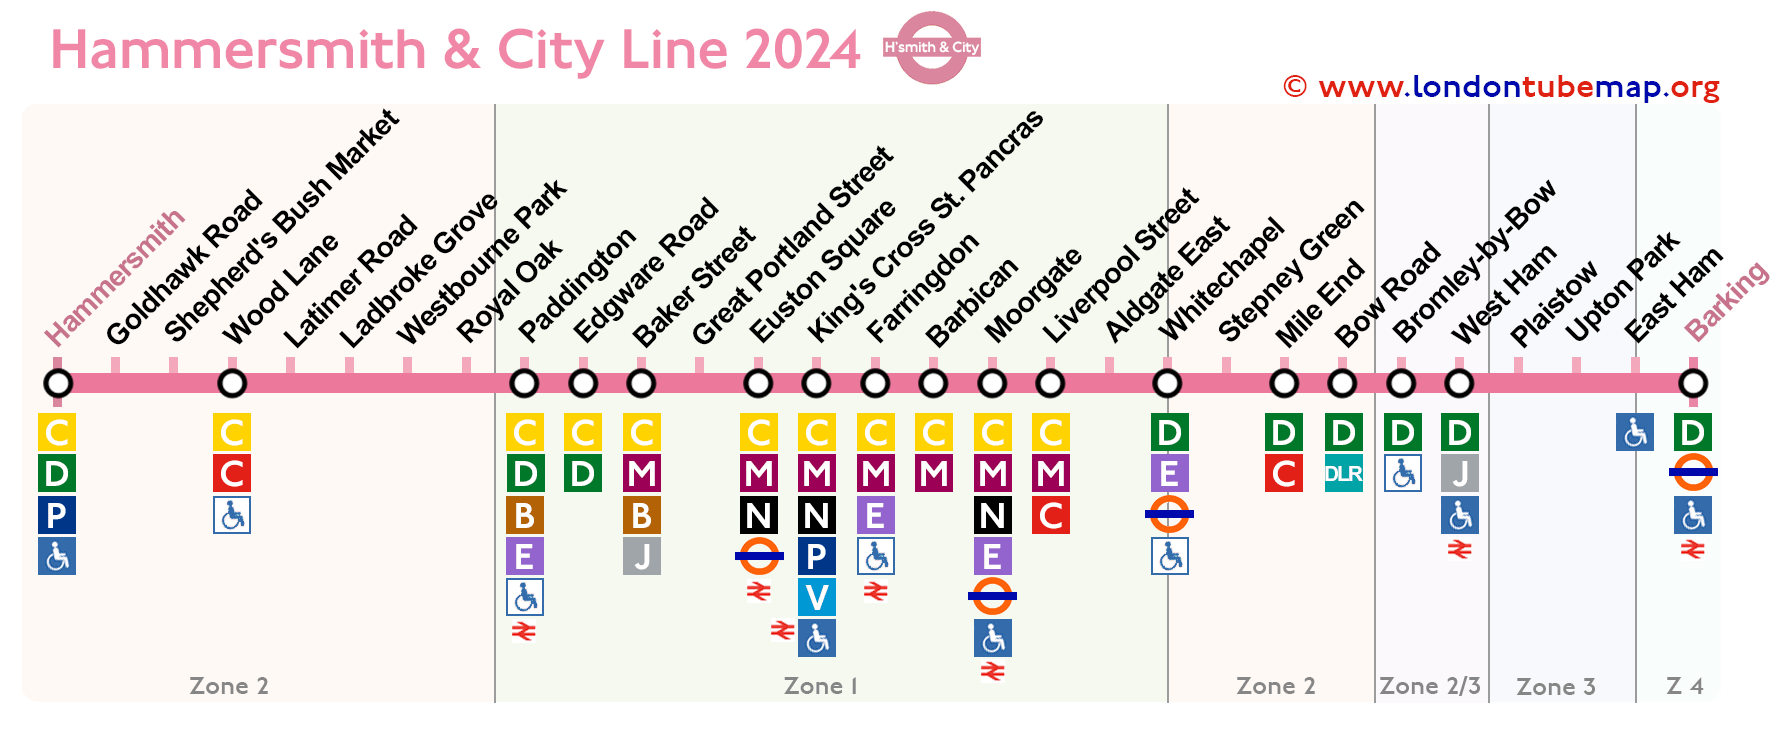 Hammersmith and City line map 2024